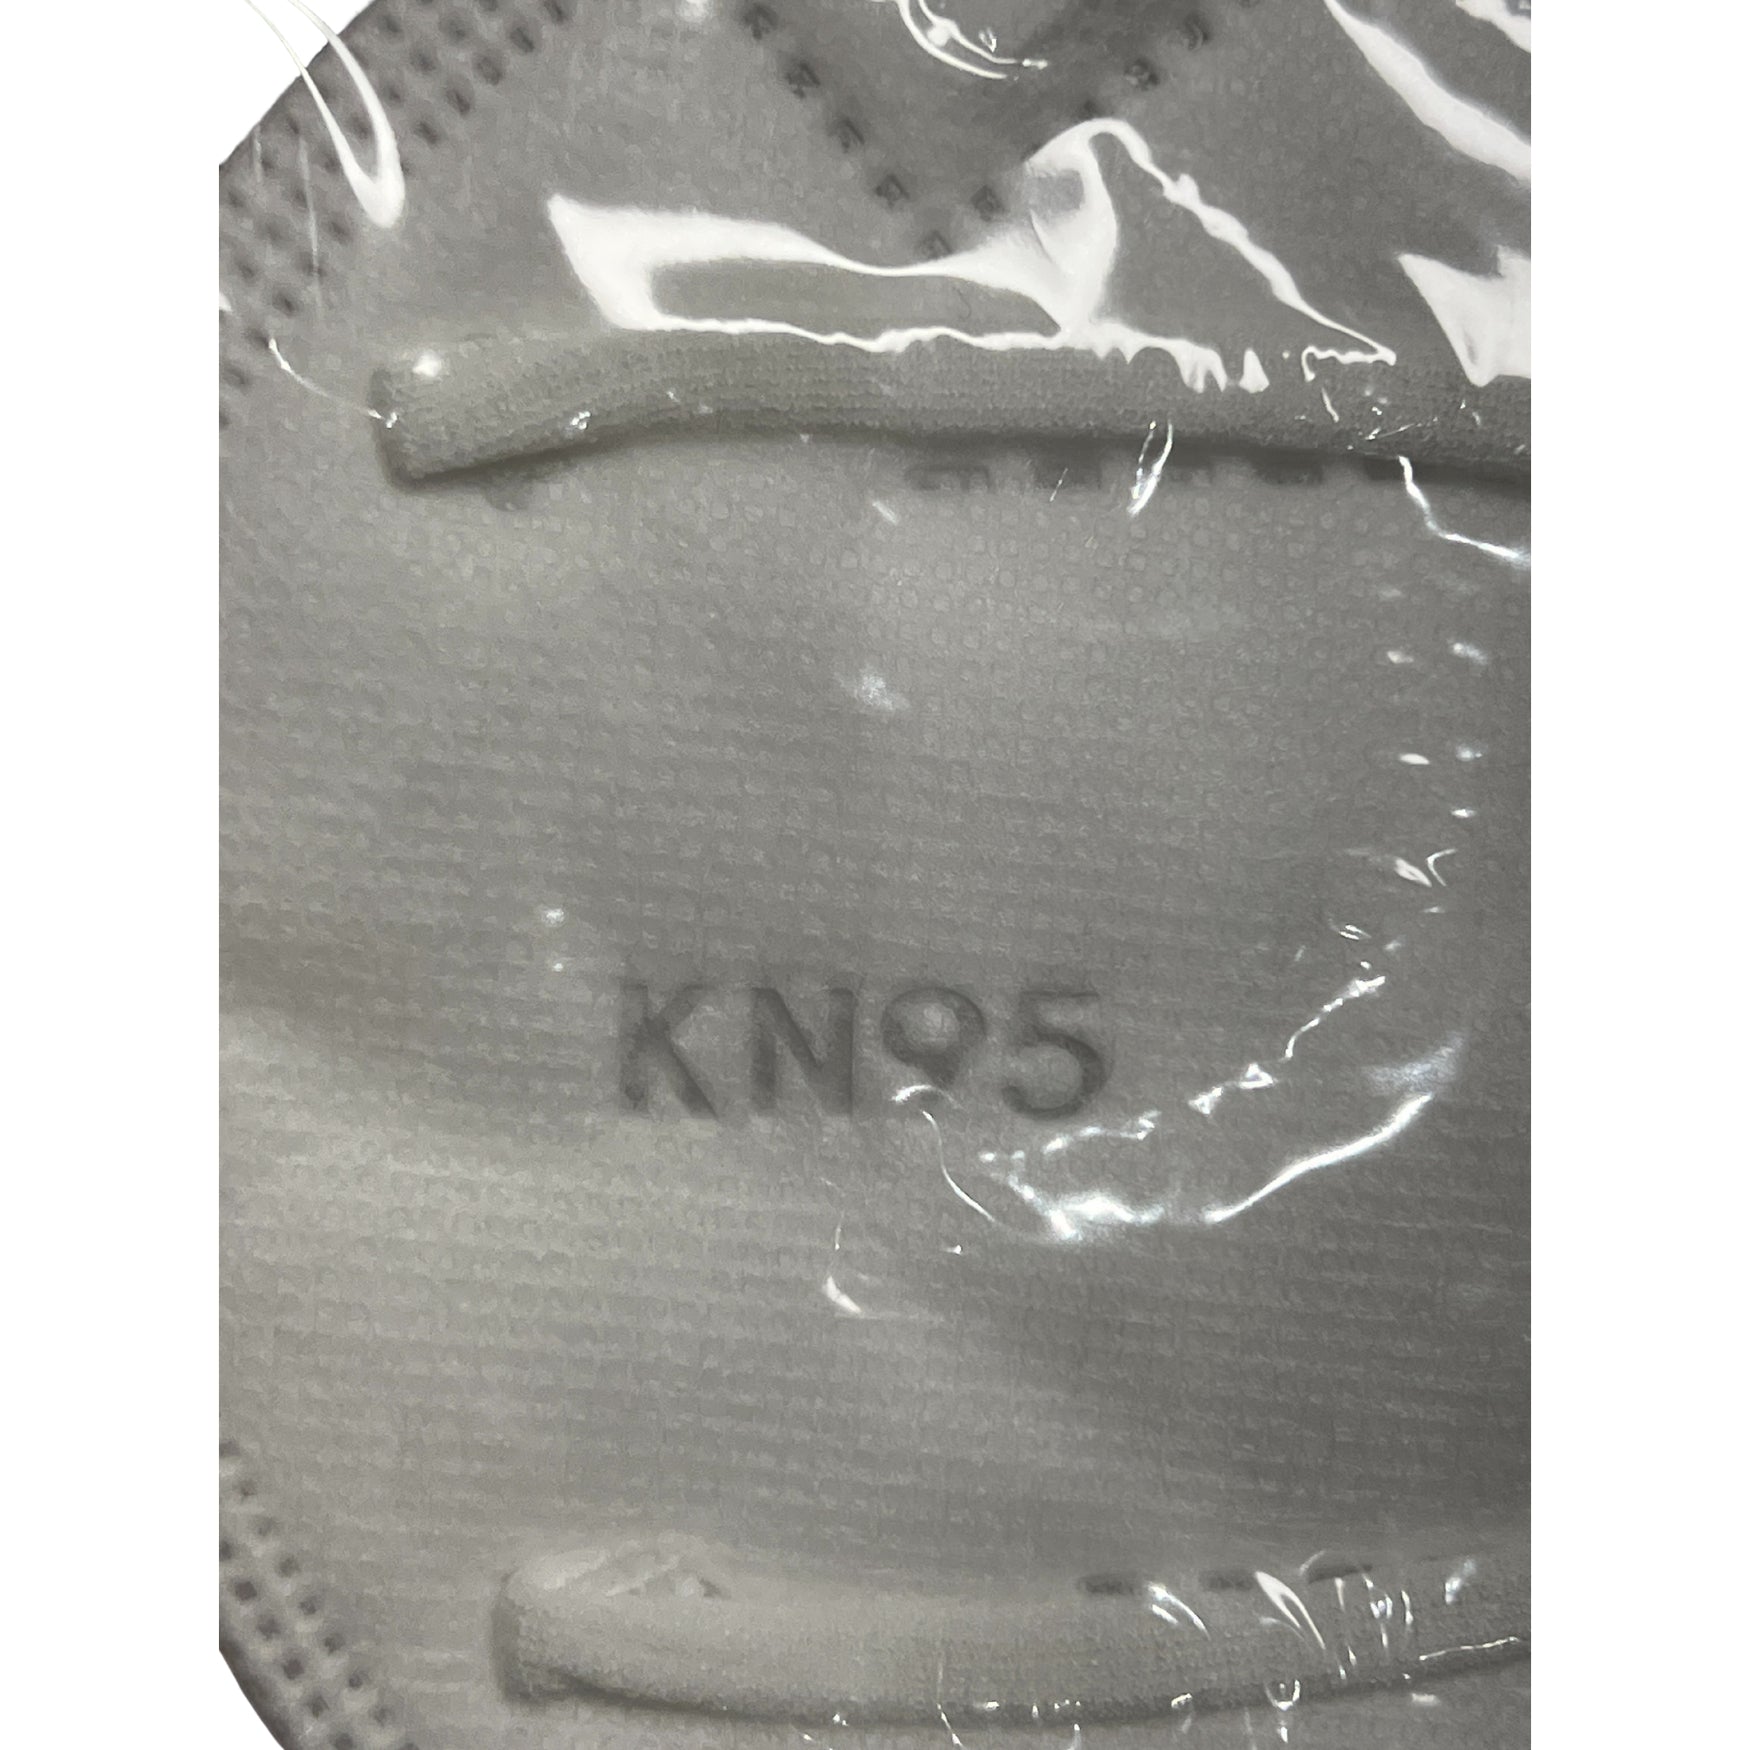 KN95 Masks Protection Against COVID-19